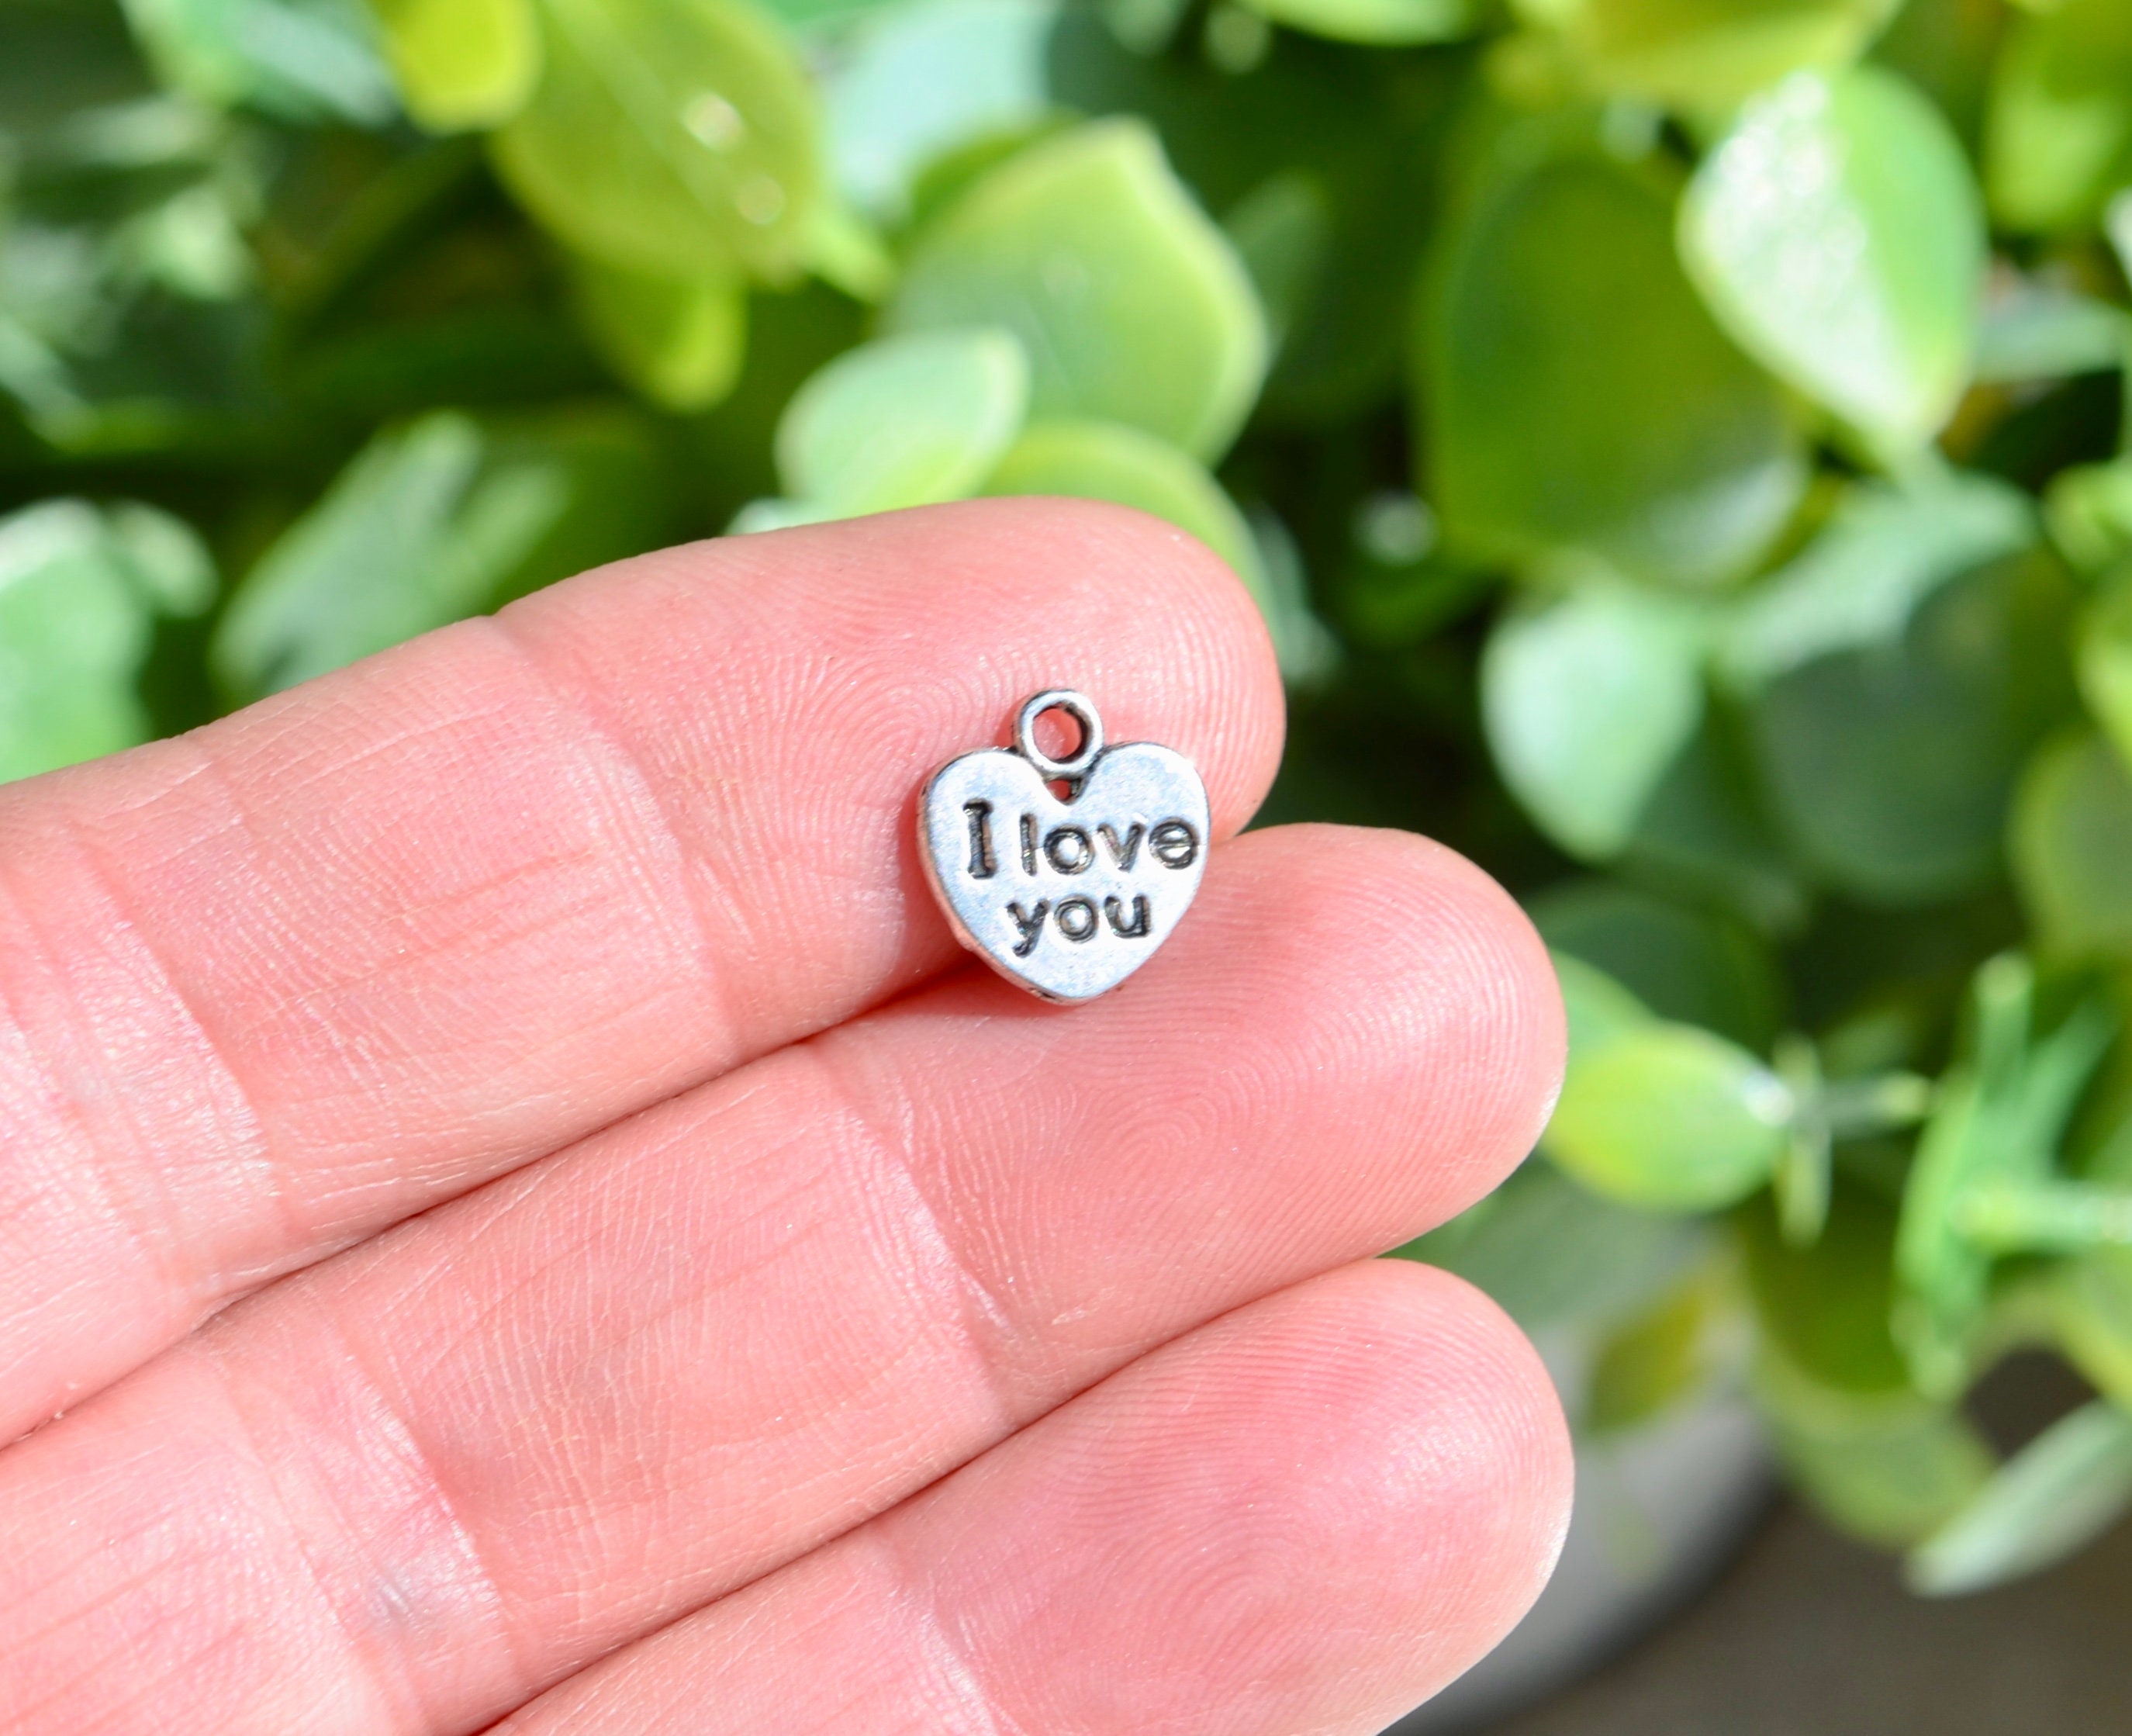 12 25mm I love you Hand ASL Charms - Mixed Color Plastic Charms bM2